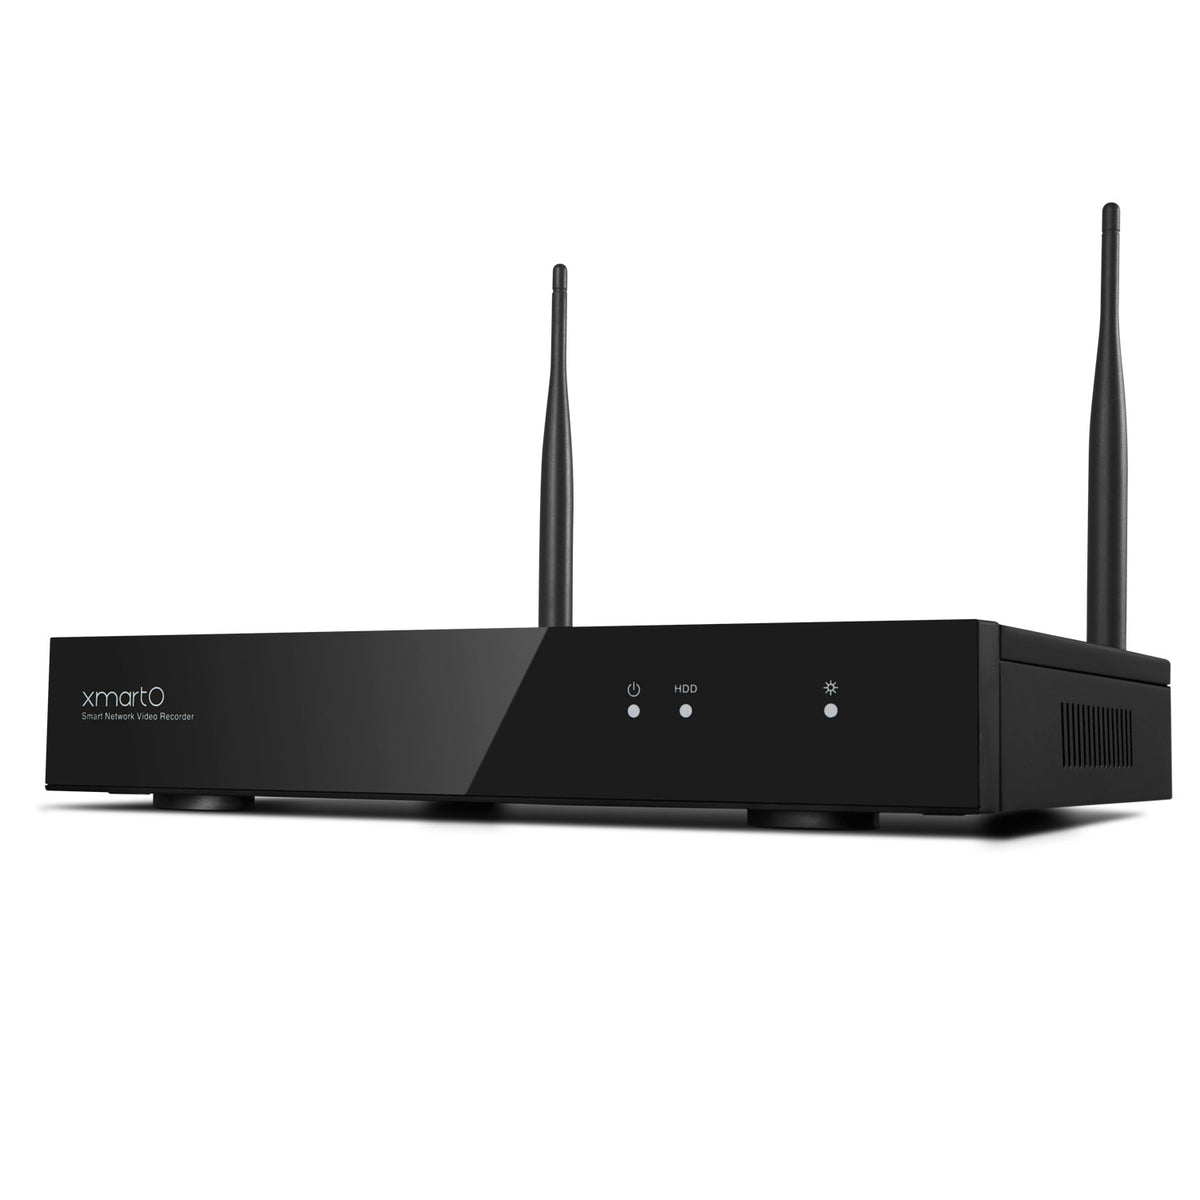 xmartO WNQ58/ WNQ28-DW 8 Channel 5MP Ultra HD Security Network Video  Recorder NVR System with Built-in WiFi Router, Supports 8 Cameras, Supports  up to 